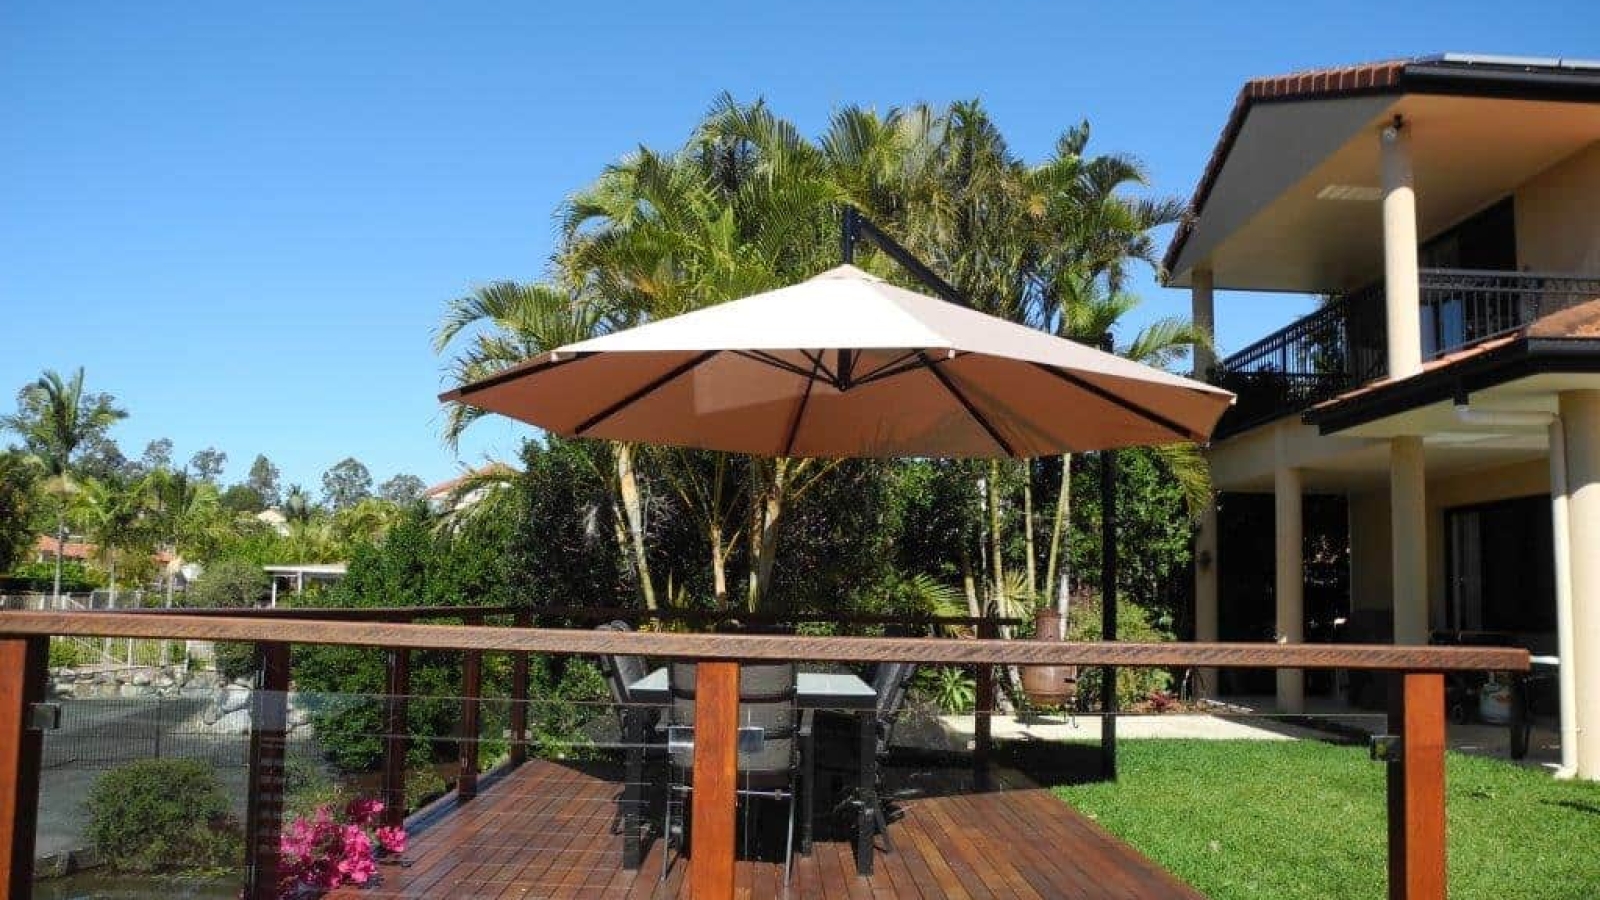 3 Reasons To Get A Giant Umbrella For Your Patio